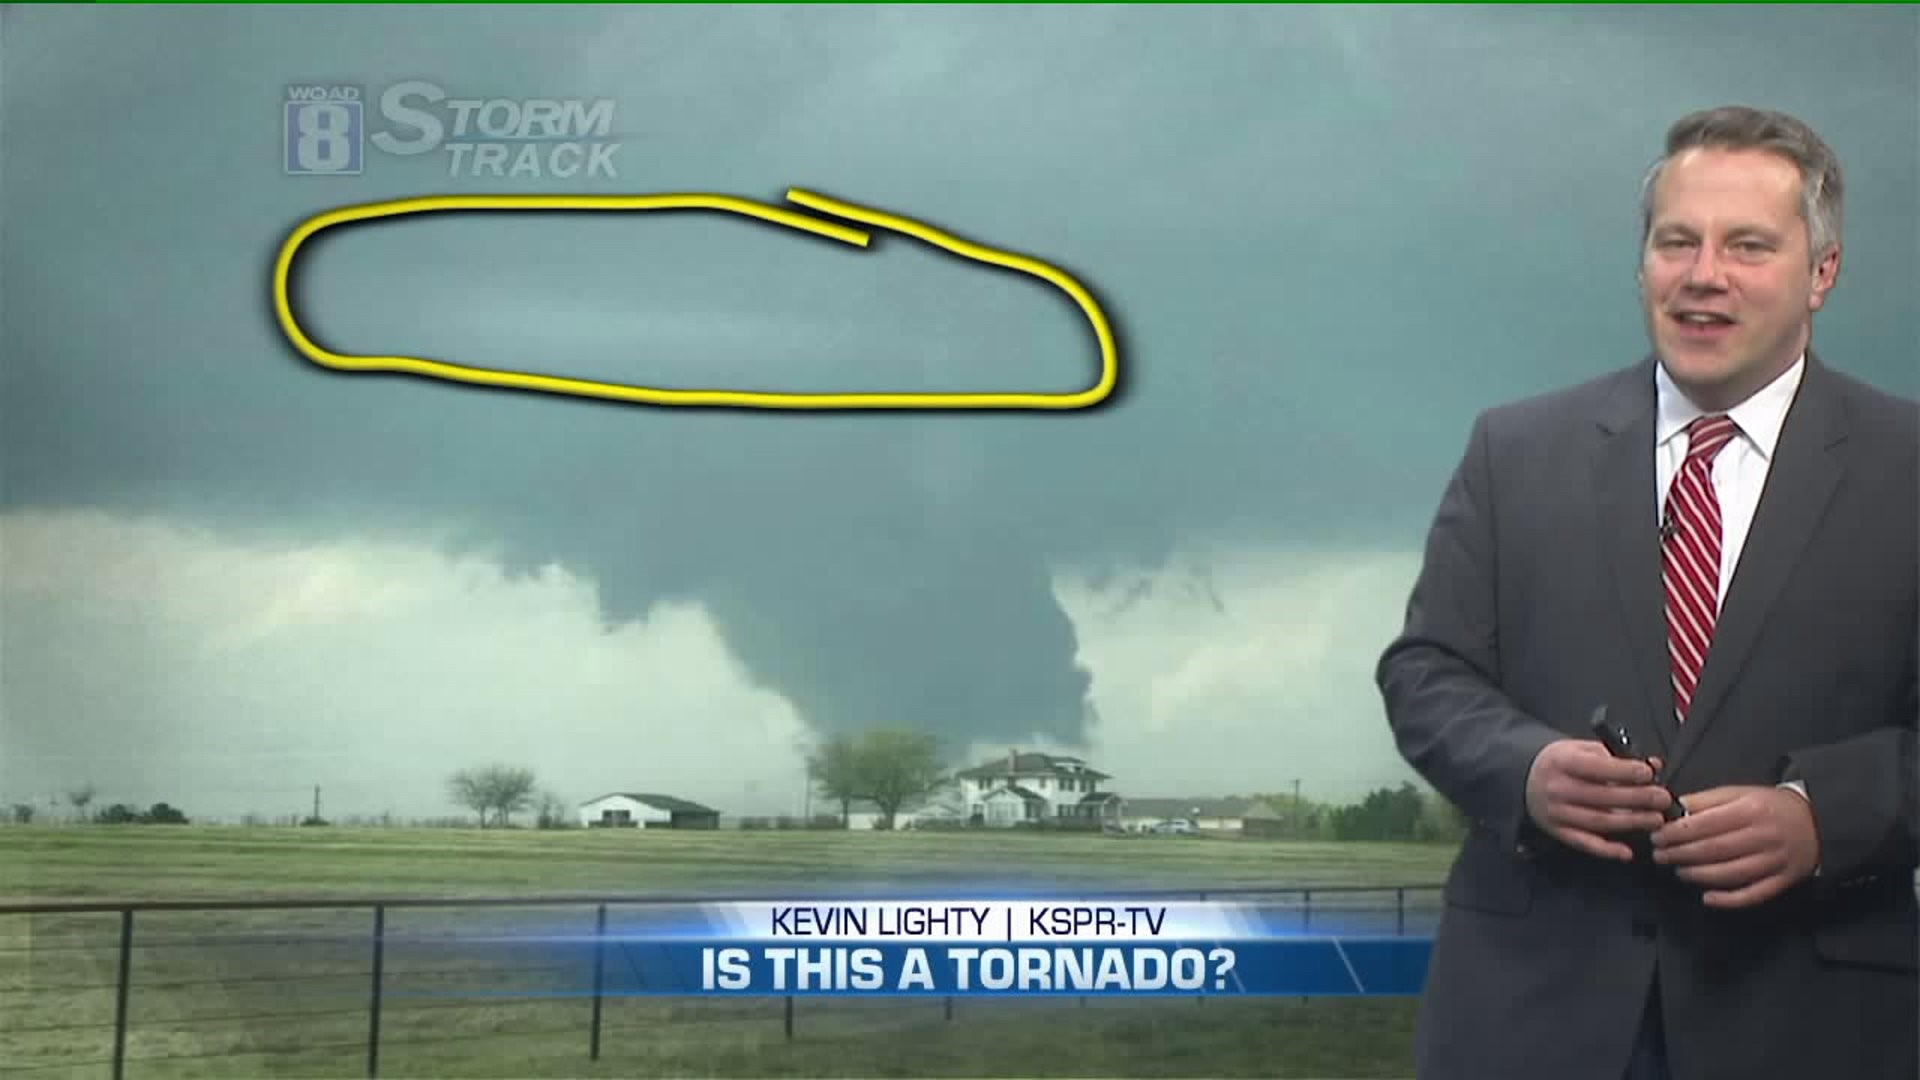 Eric talks about what you should look for when you see a scary looking cloud like this